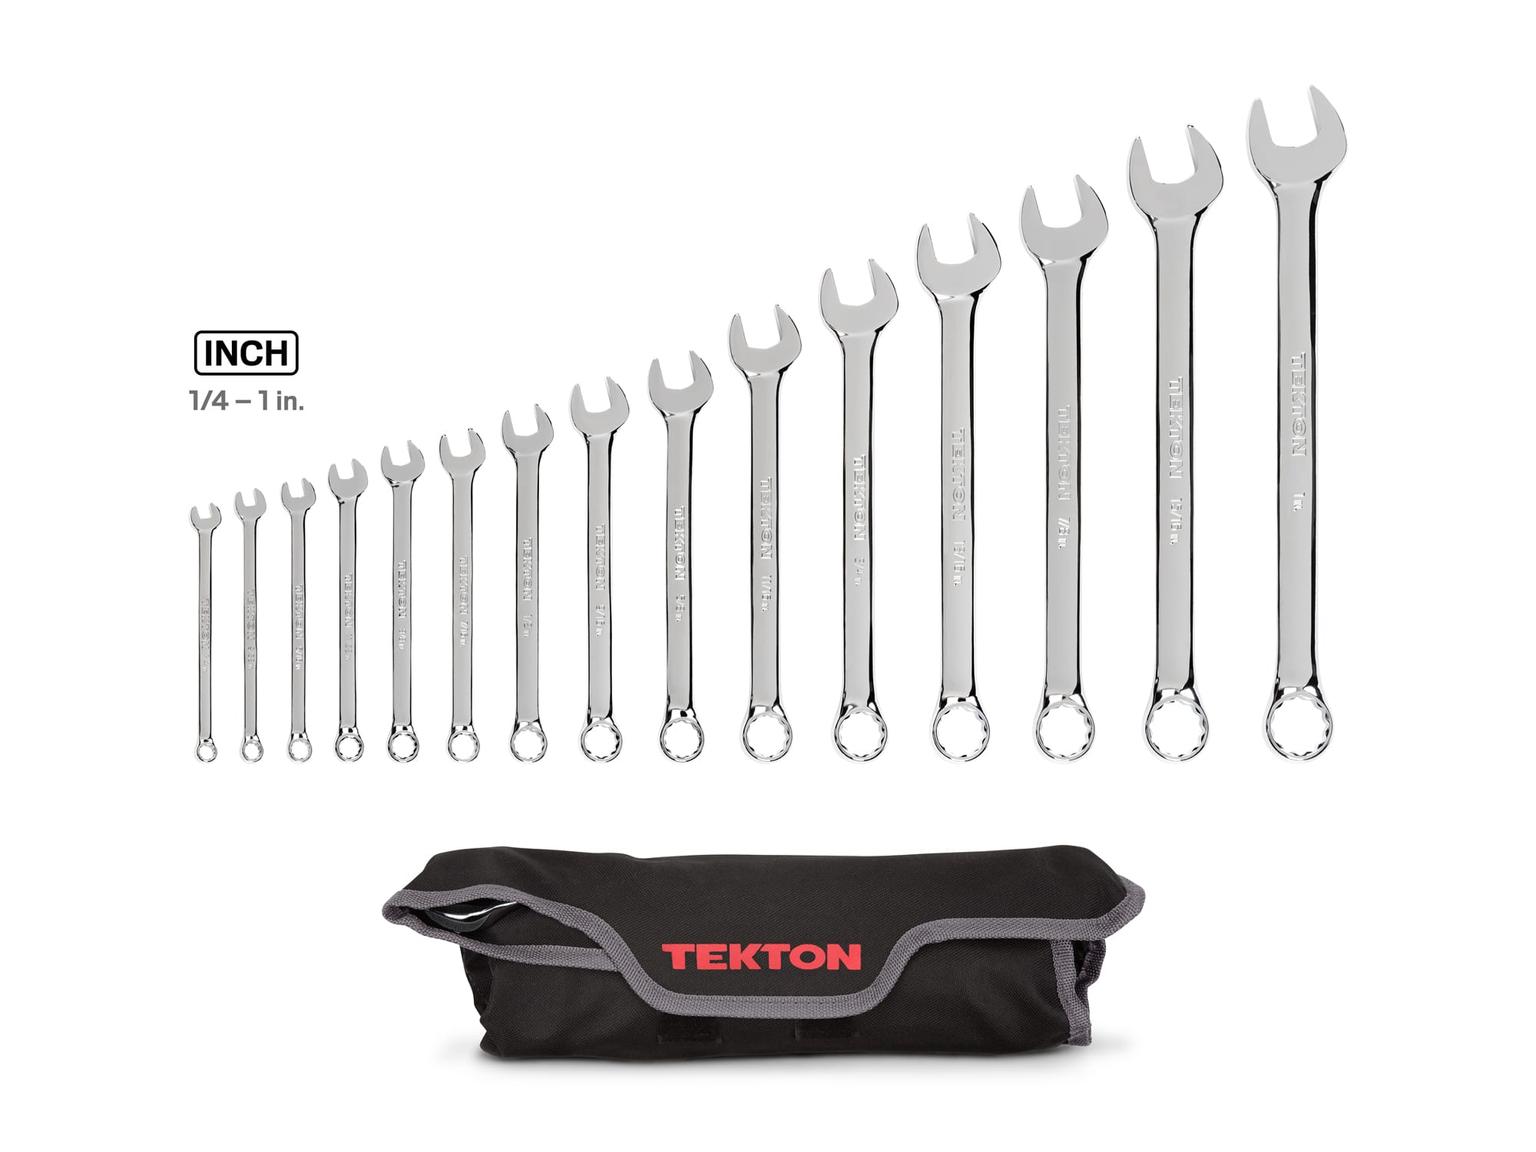 TEKTON WRN03293-T Combination Wrench Set with Pouch, 15-Piece (1/4 - 1 inch)